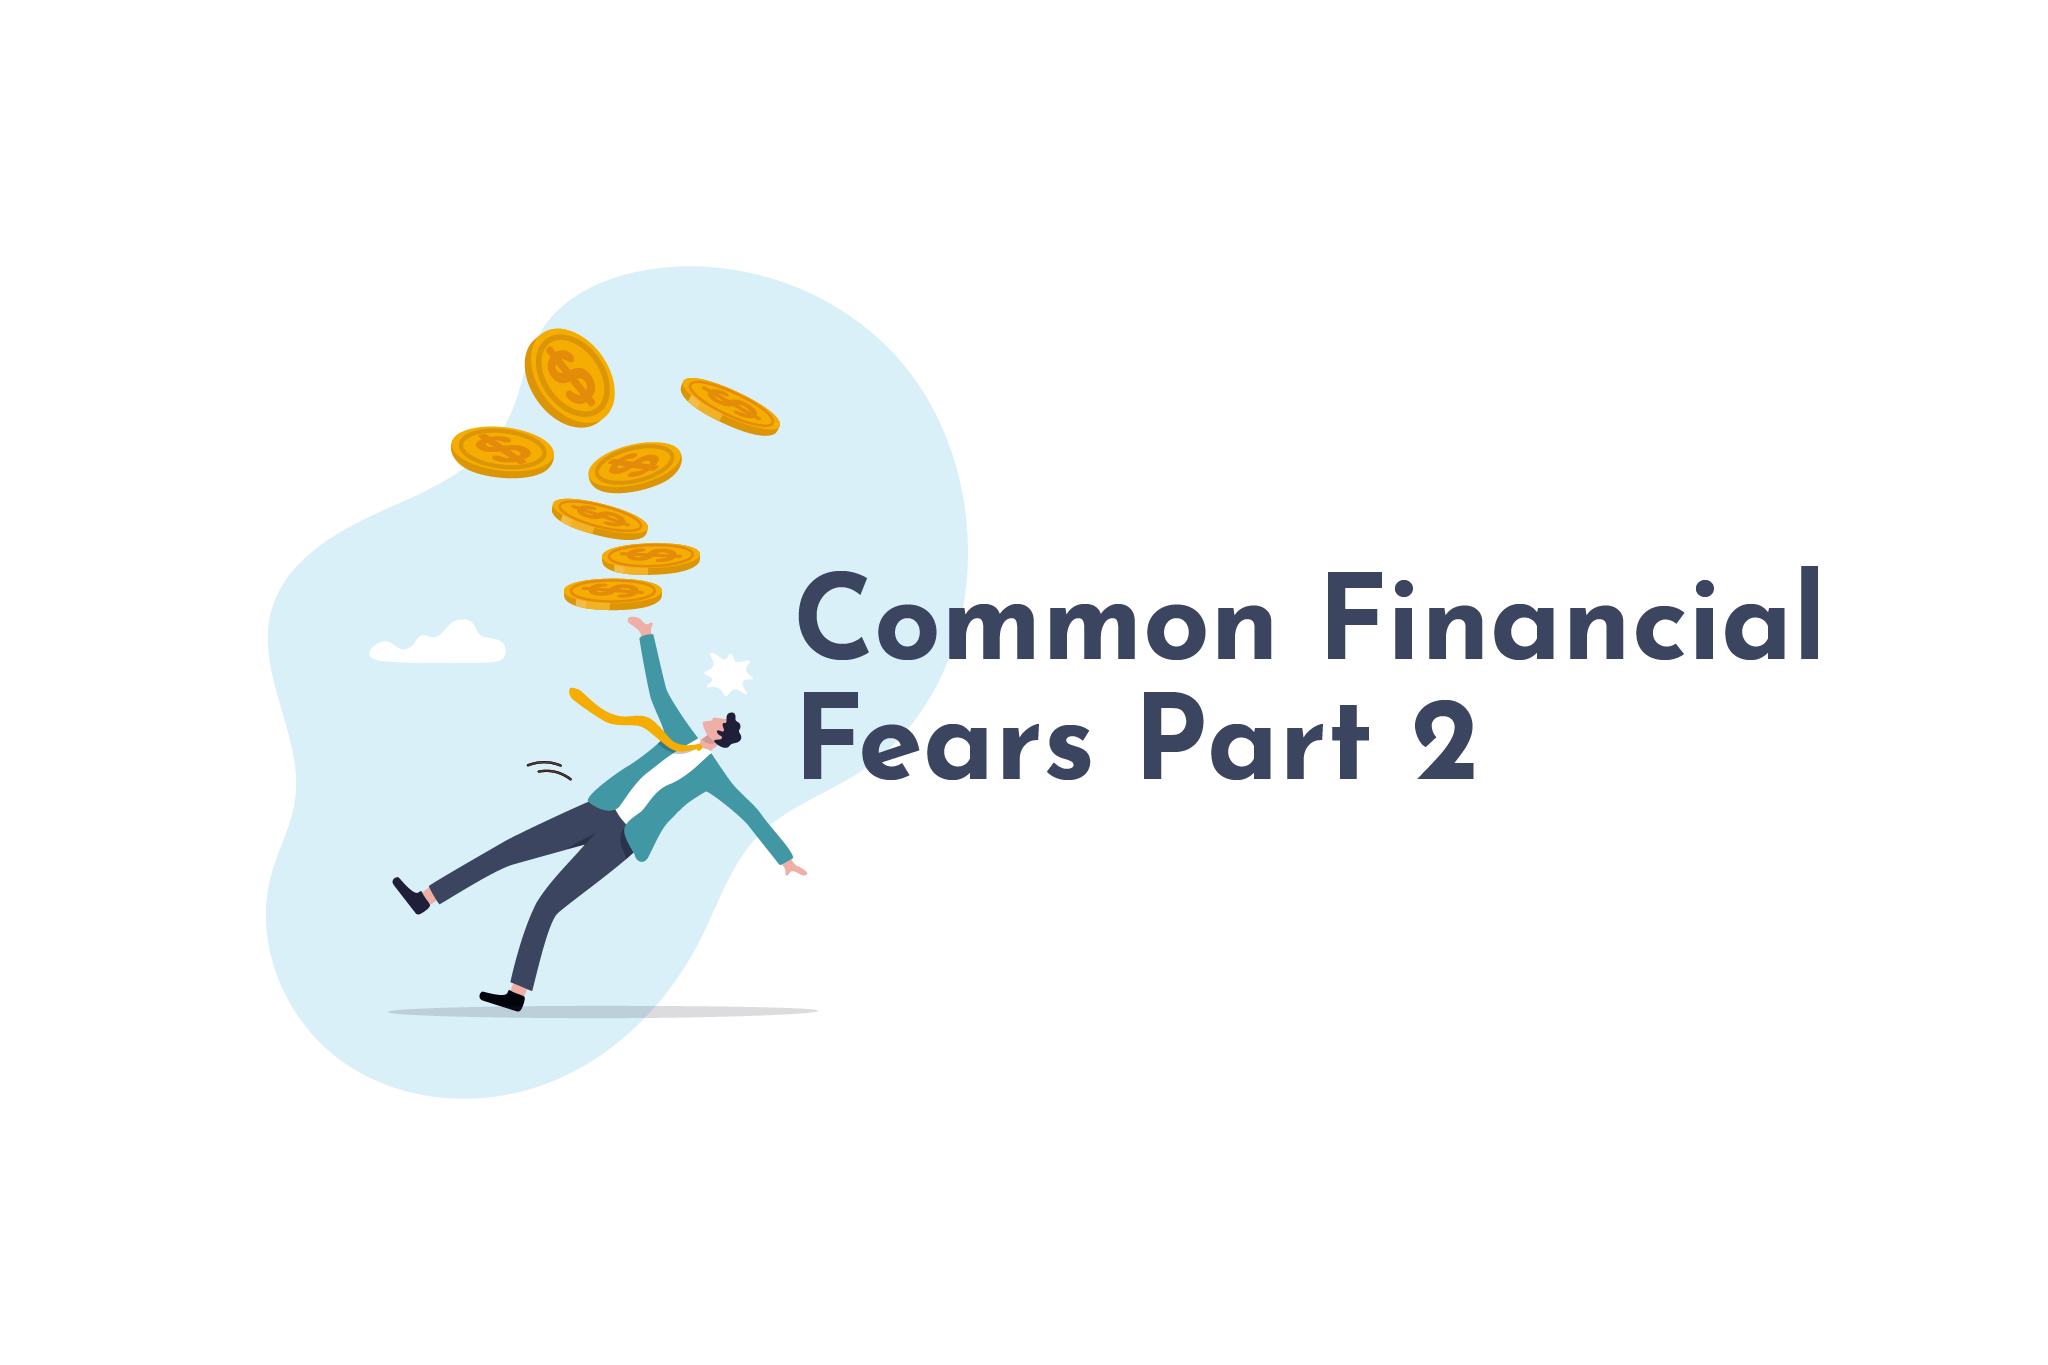 Common Financial Fears Part 2